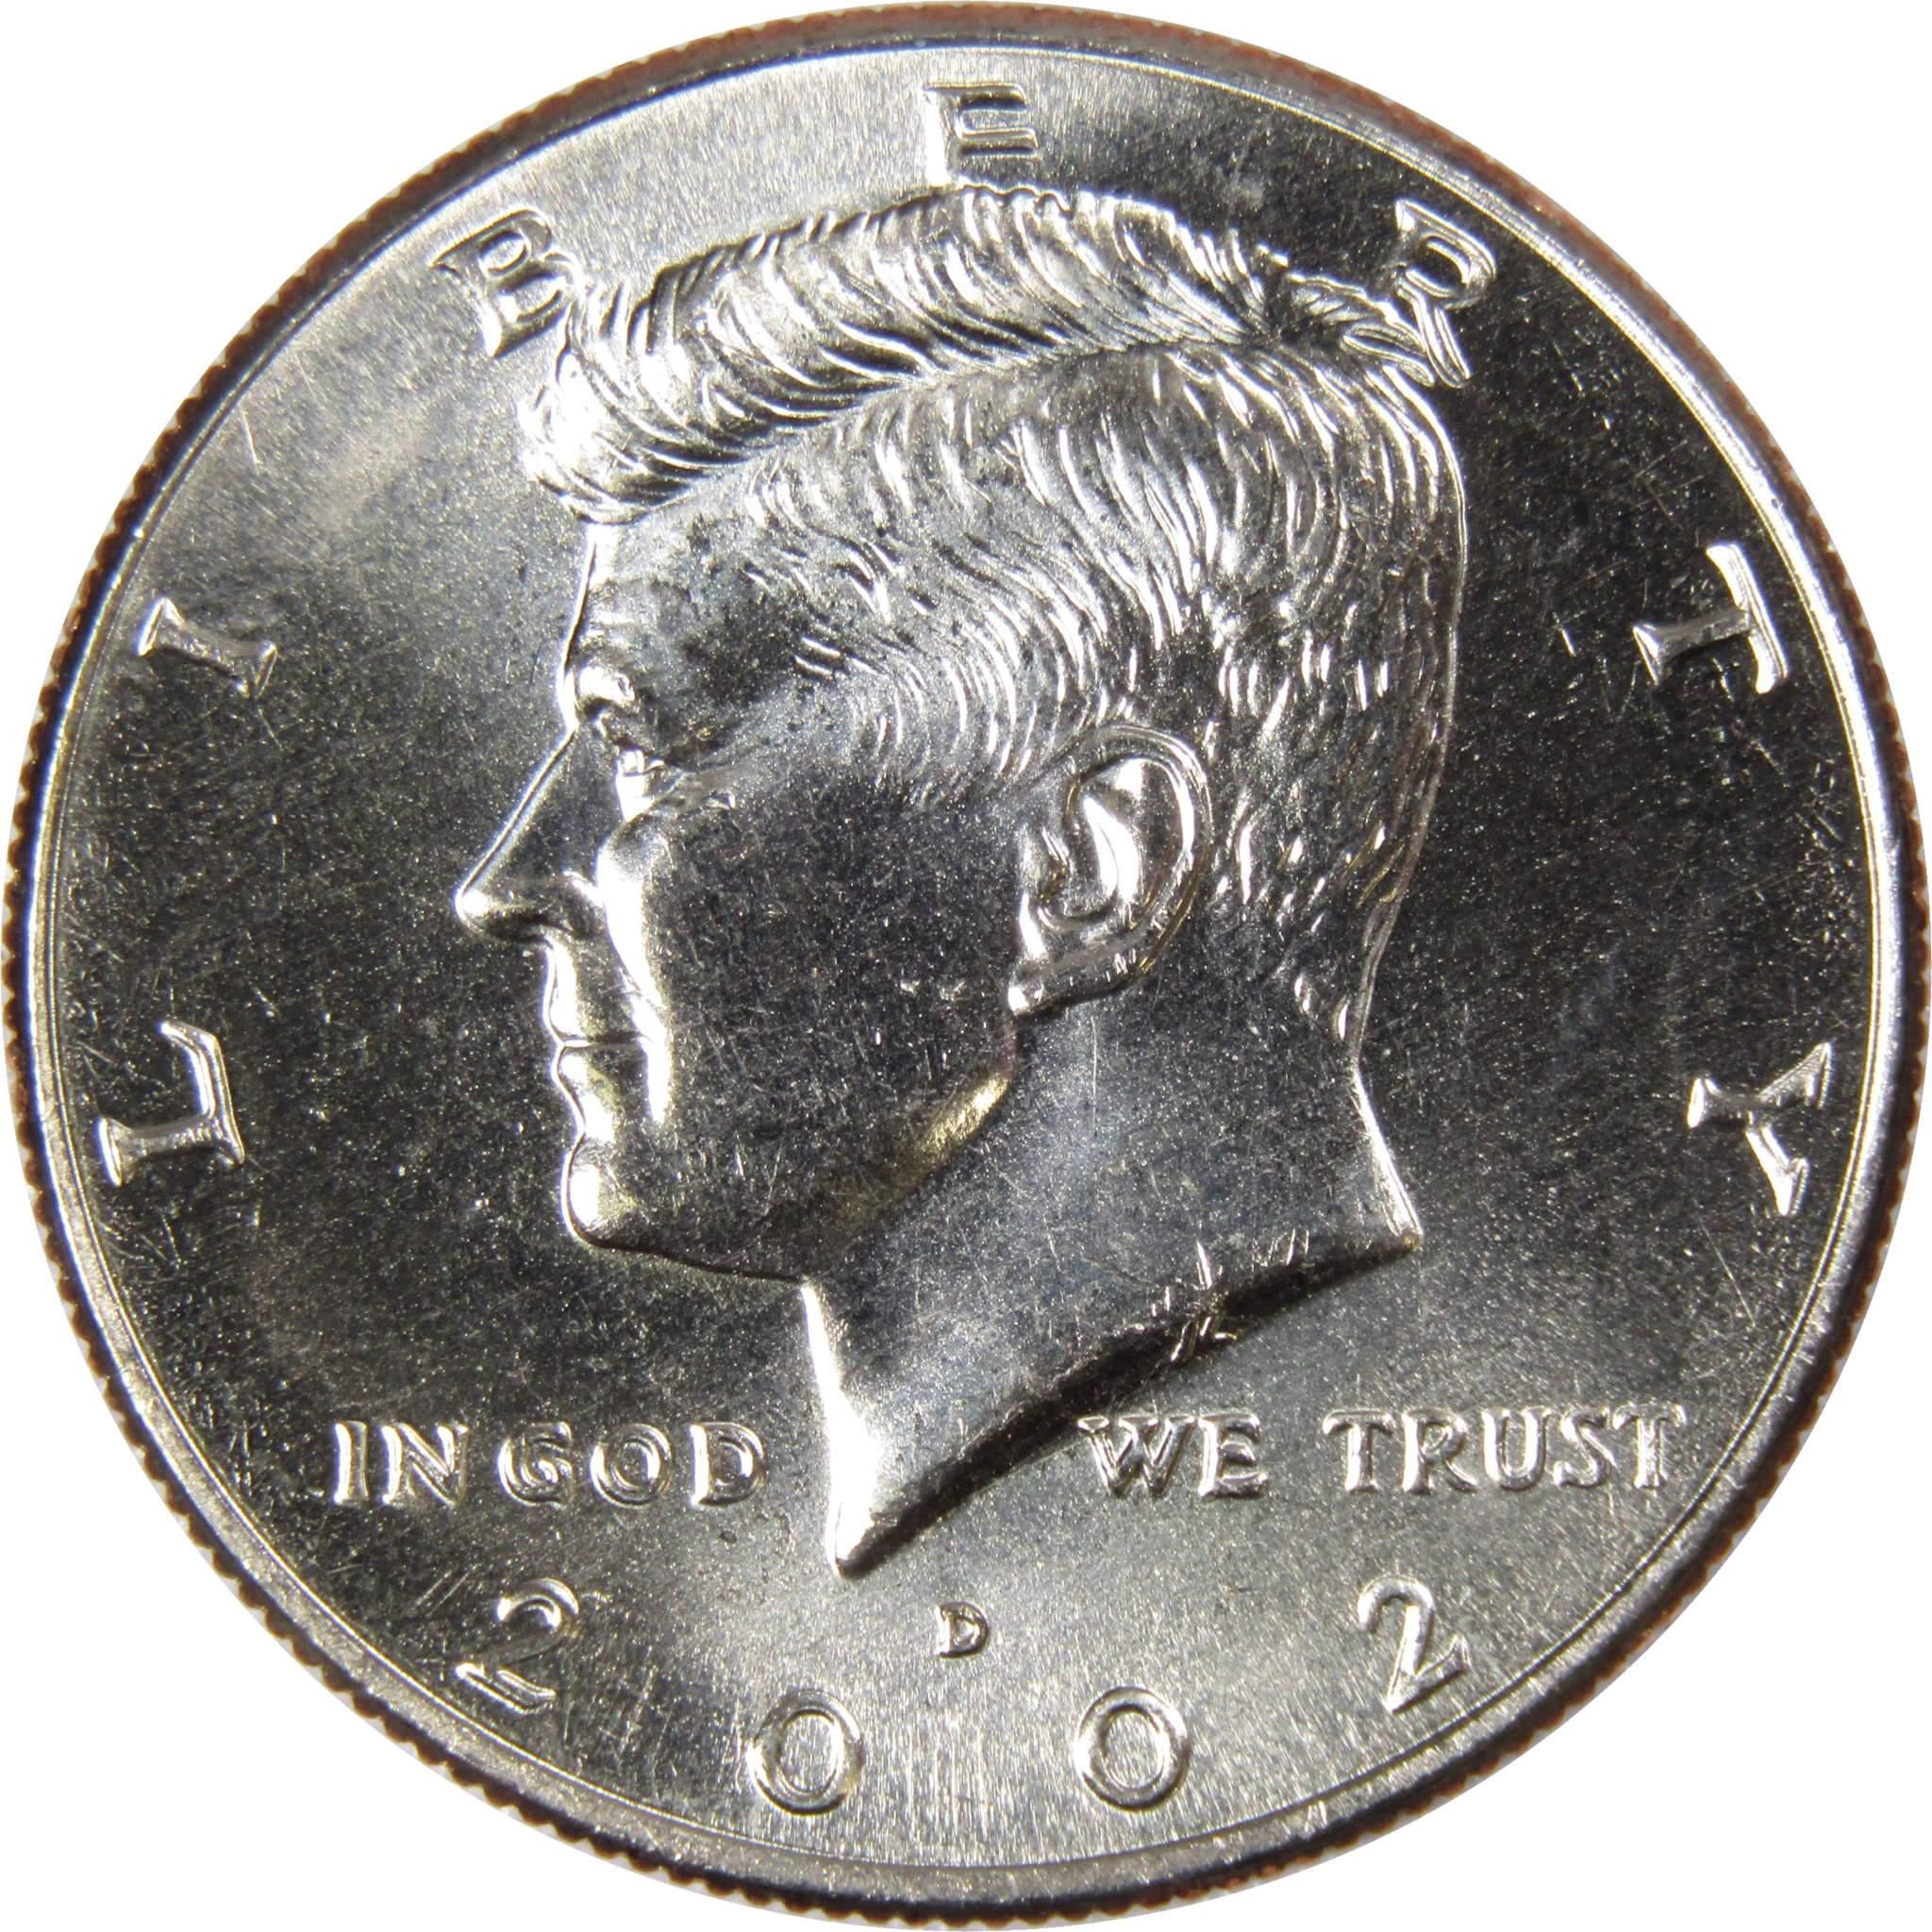 2002 D Kennedy Half Dollar BU Uncirculated Mint State 50c US Coin Collectible